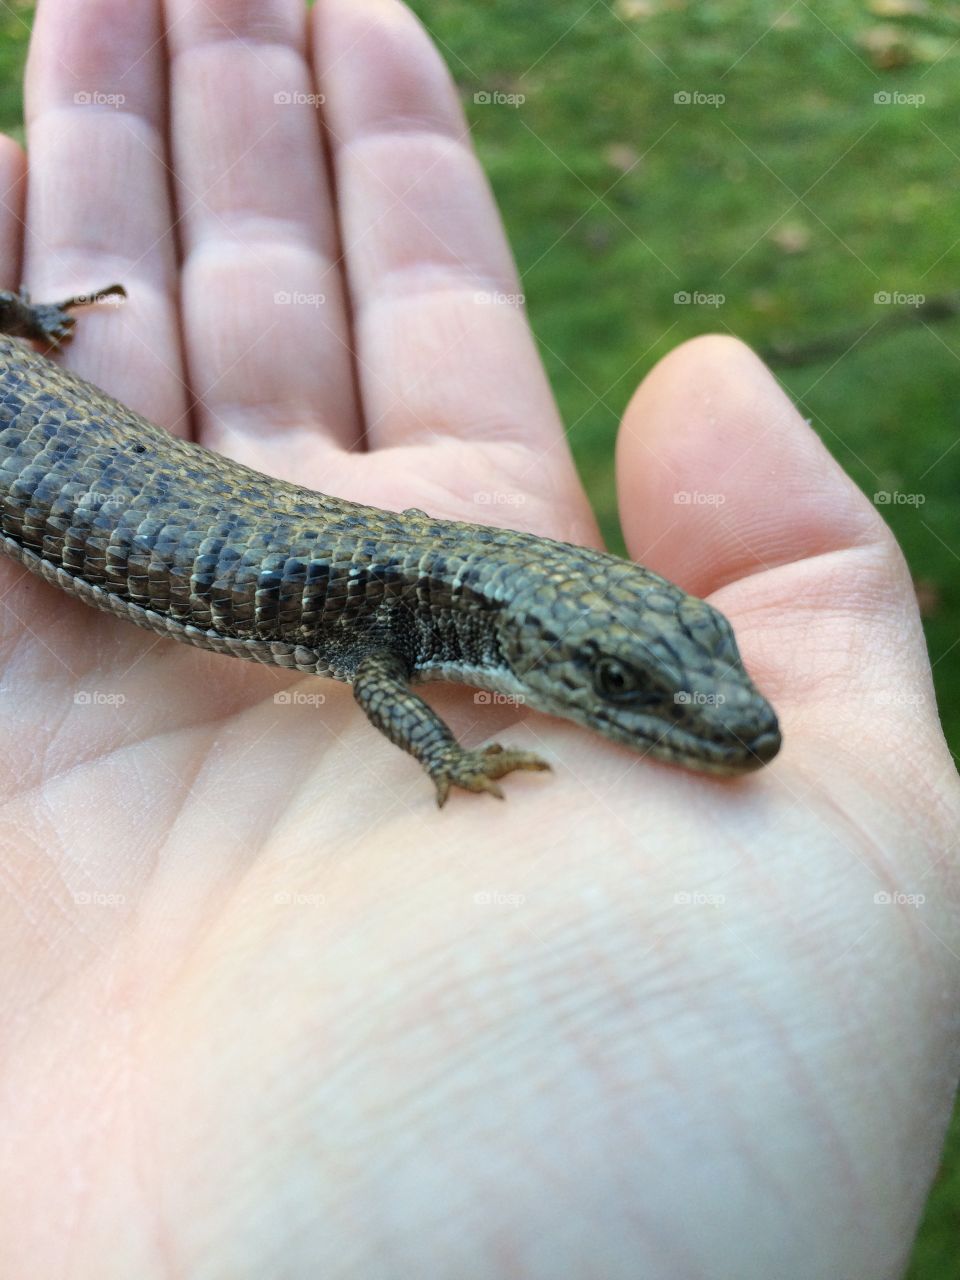 Alligator in the palm of my hand 